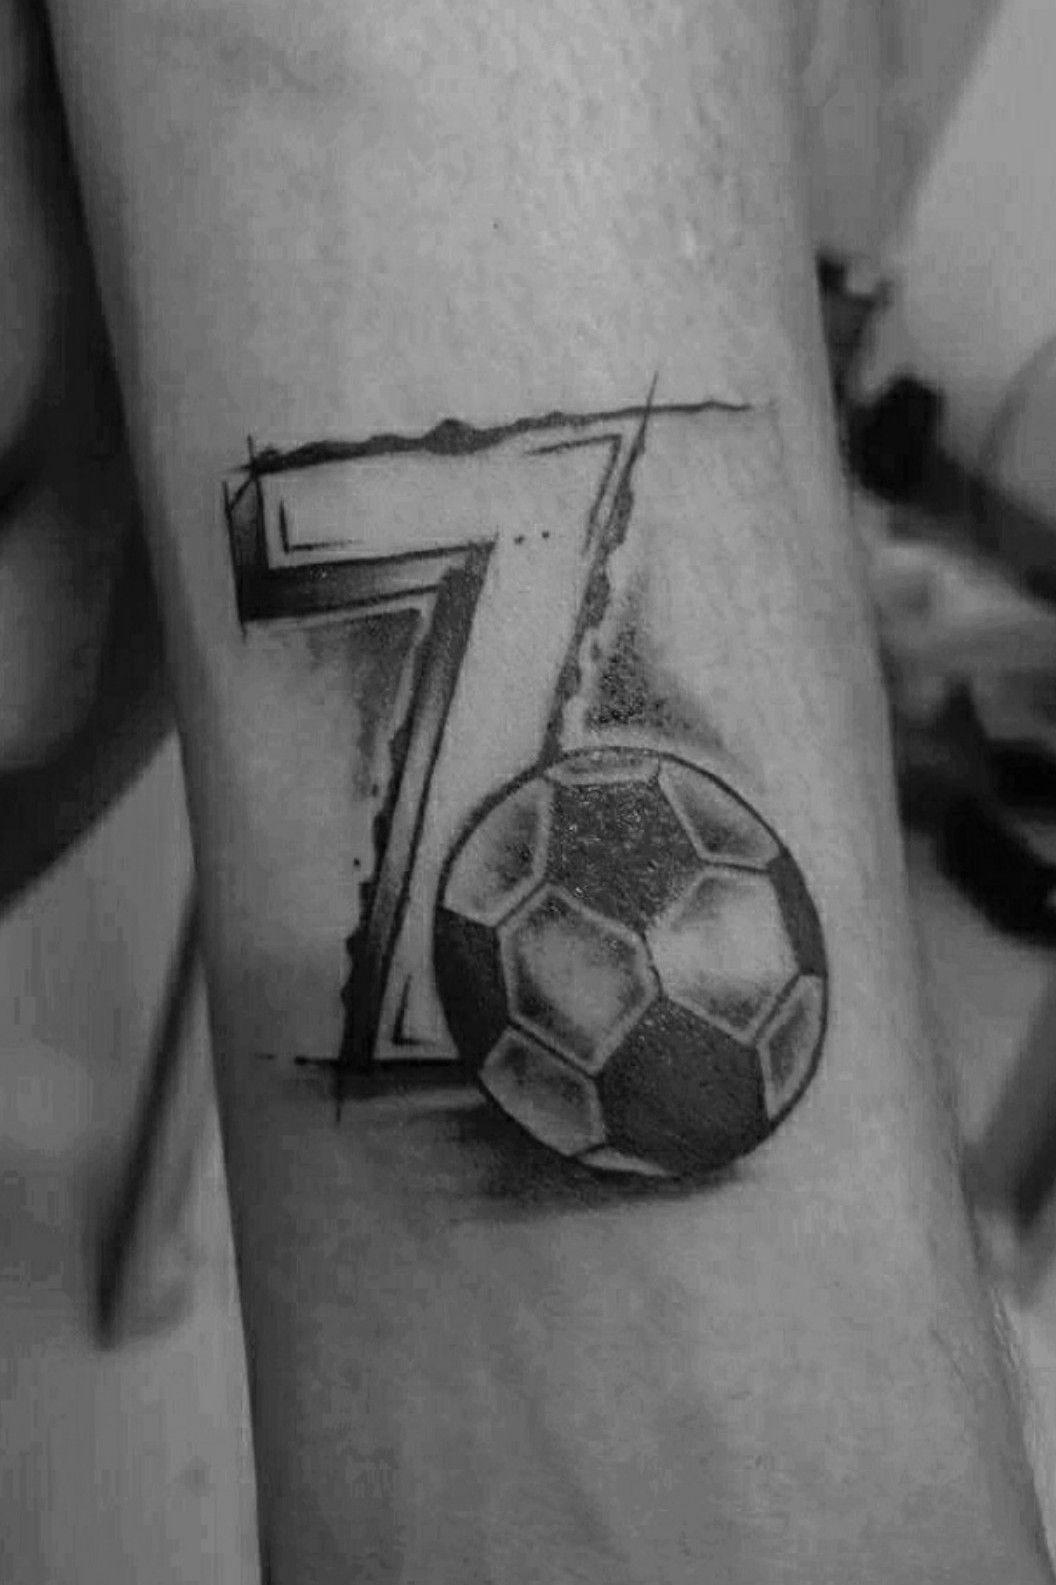 cr7 in Tattoos  Search in 13M Tattoos Now  Tattoodo